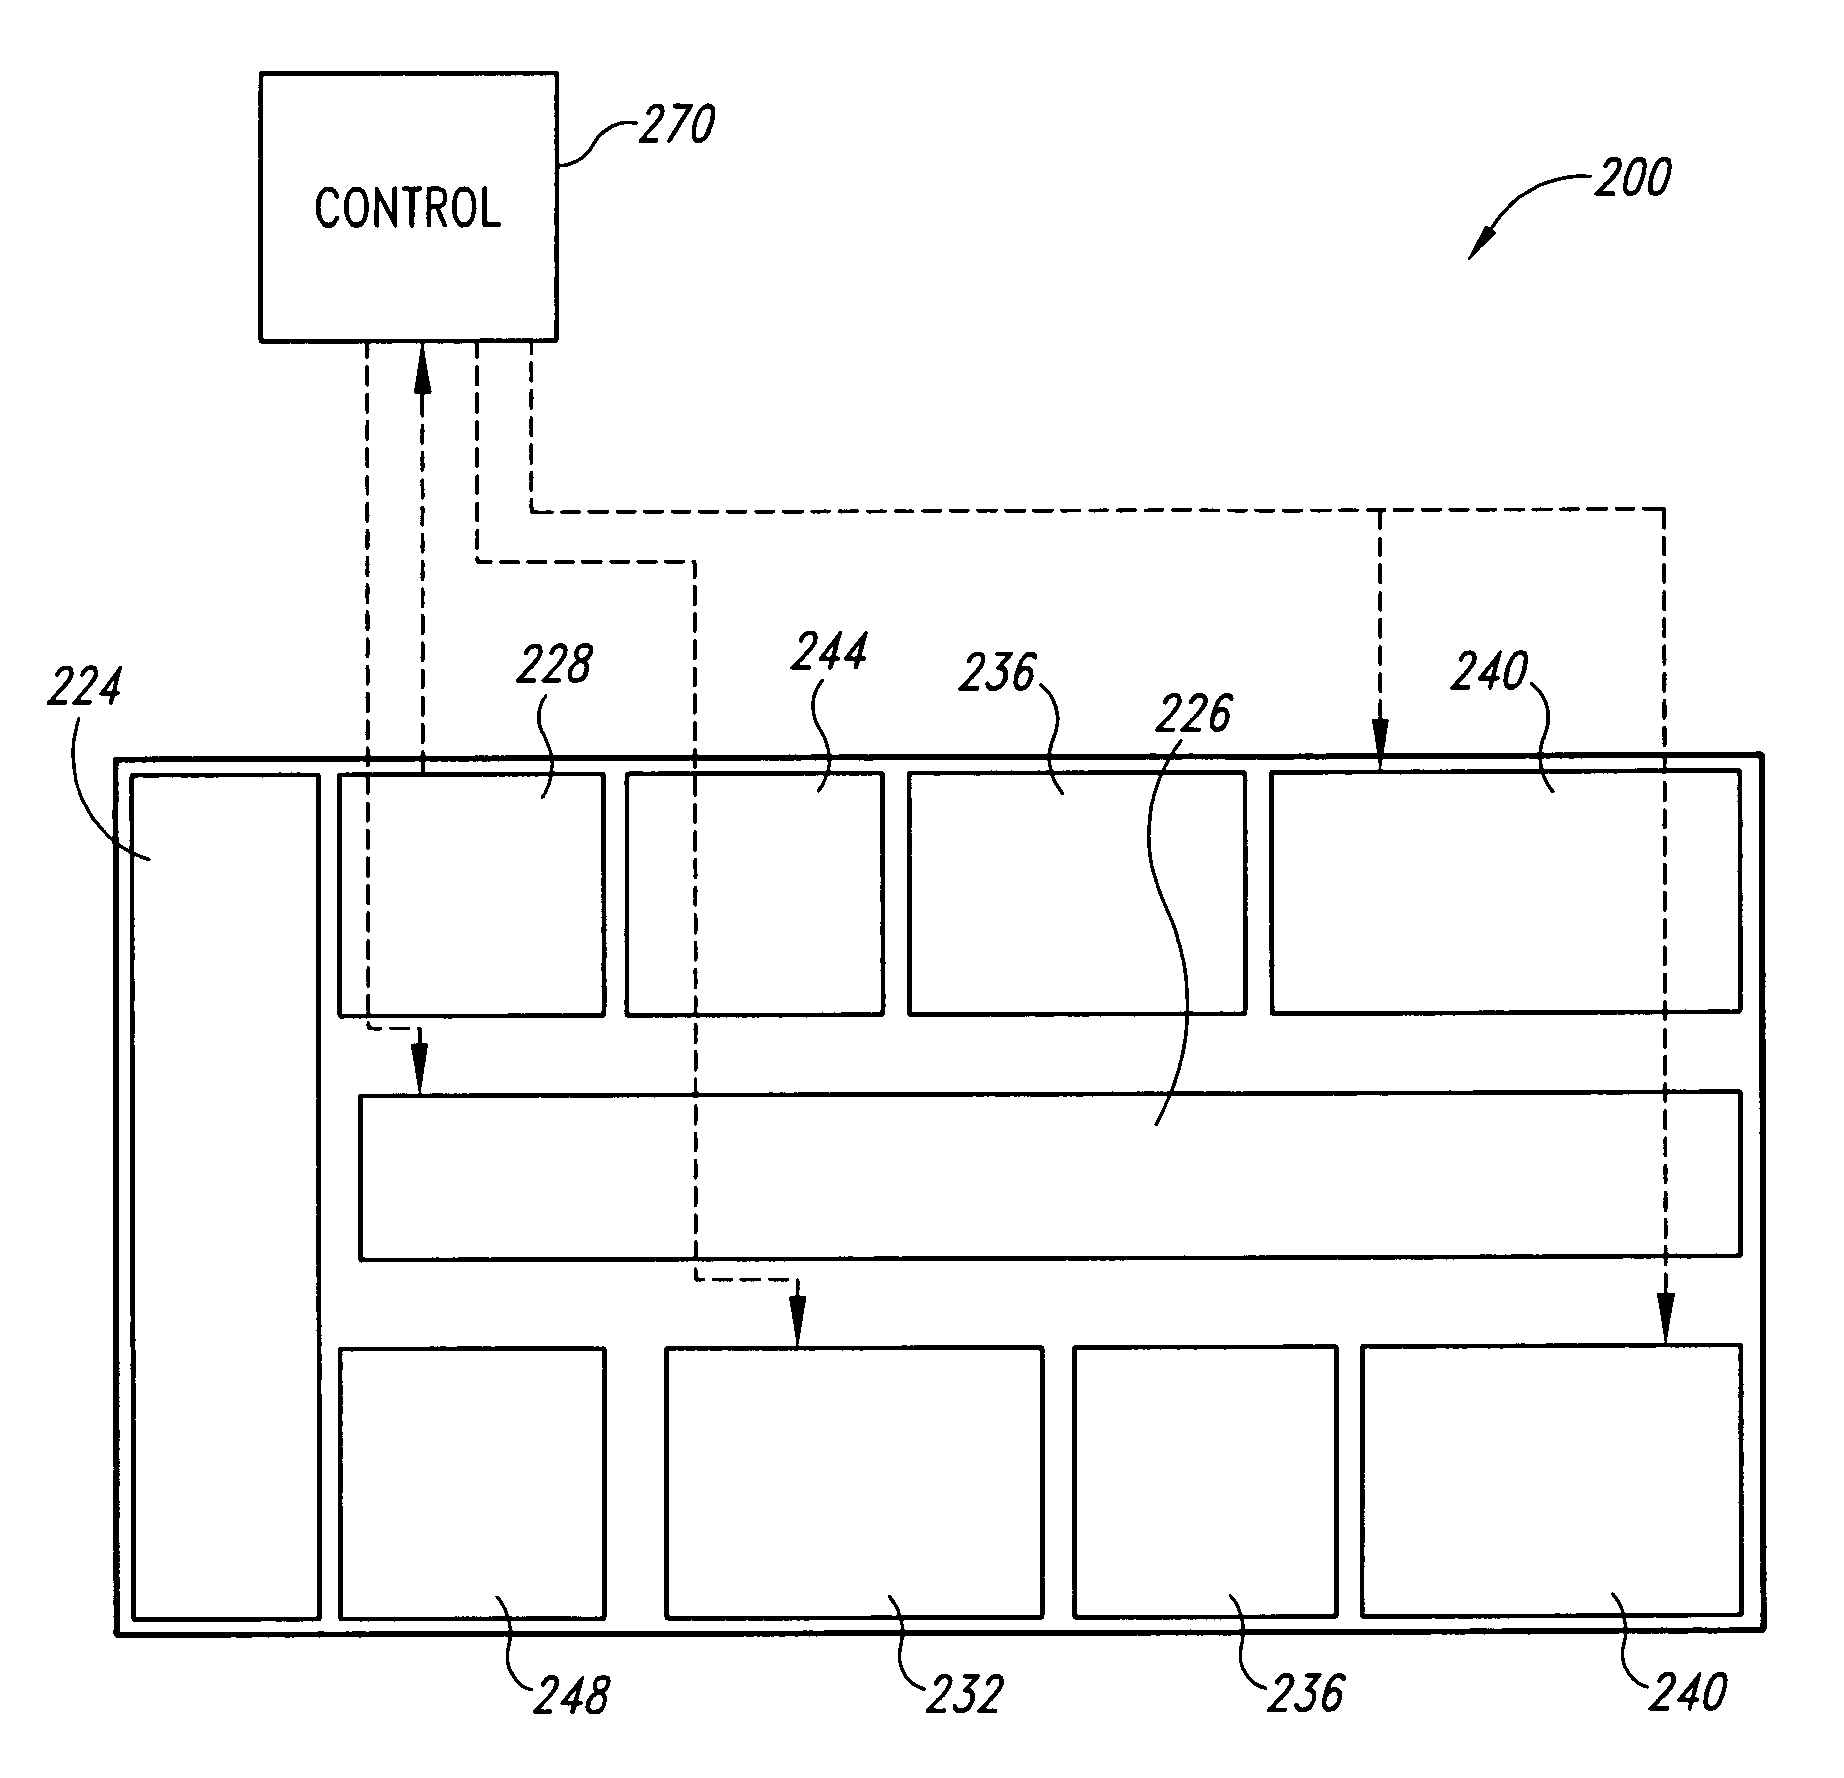 Apparatus and method for processing a microelectronic workpiece using metrology